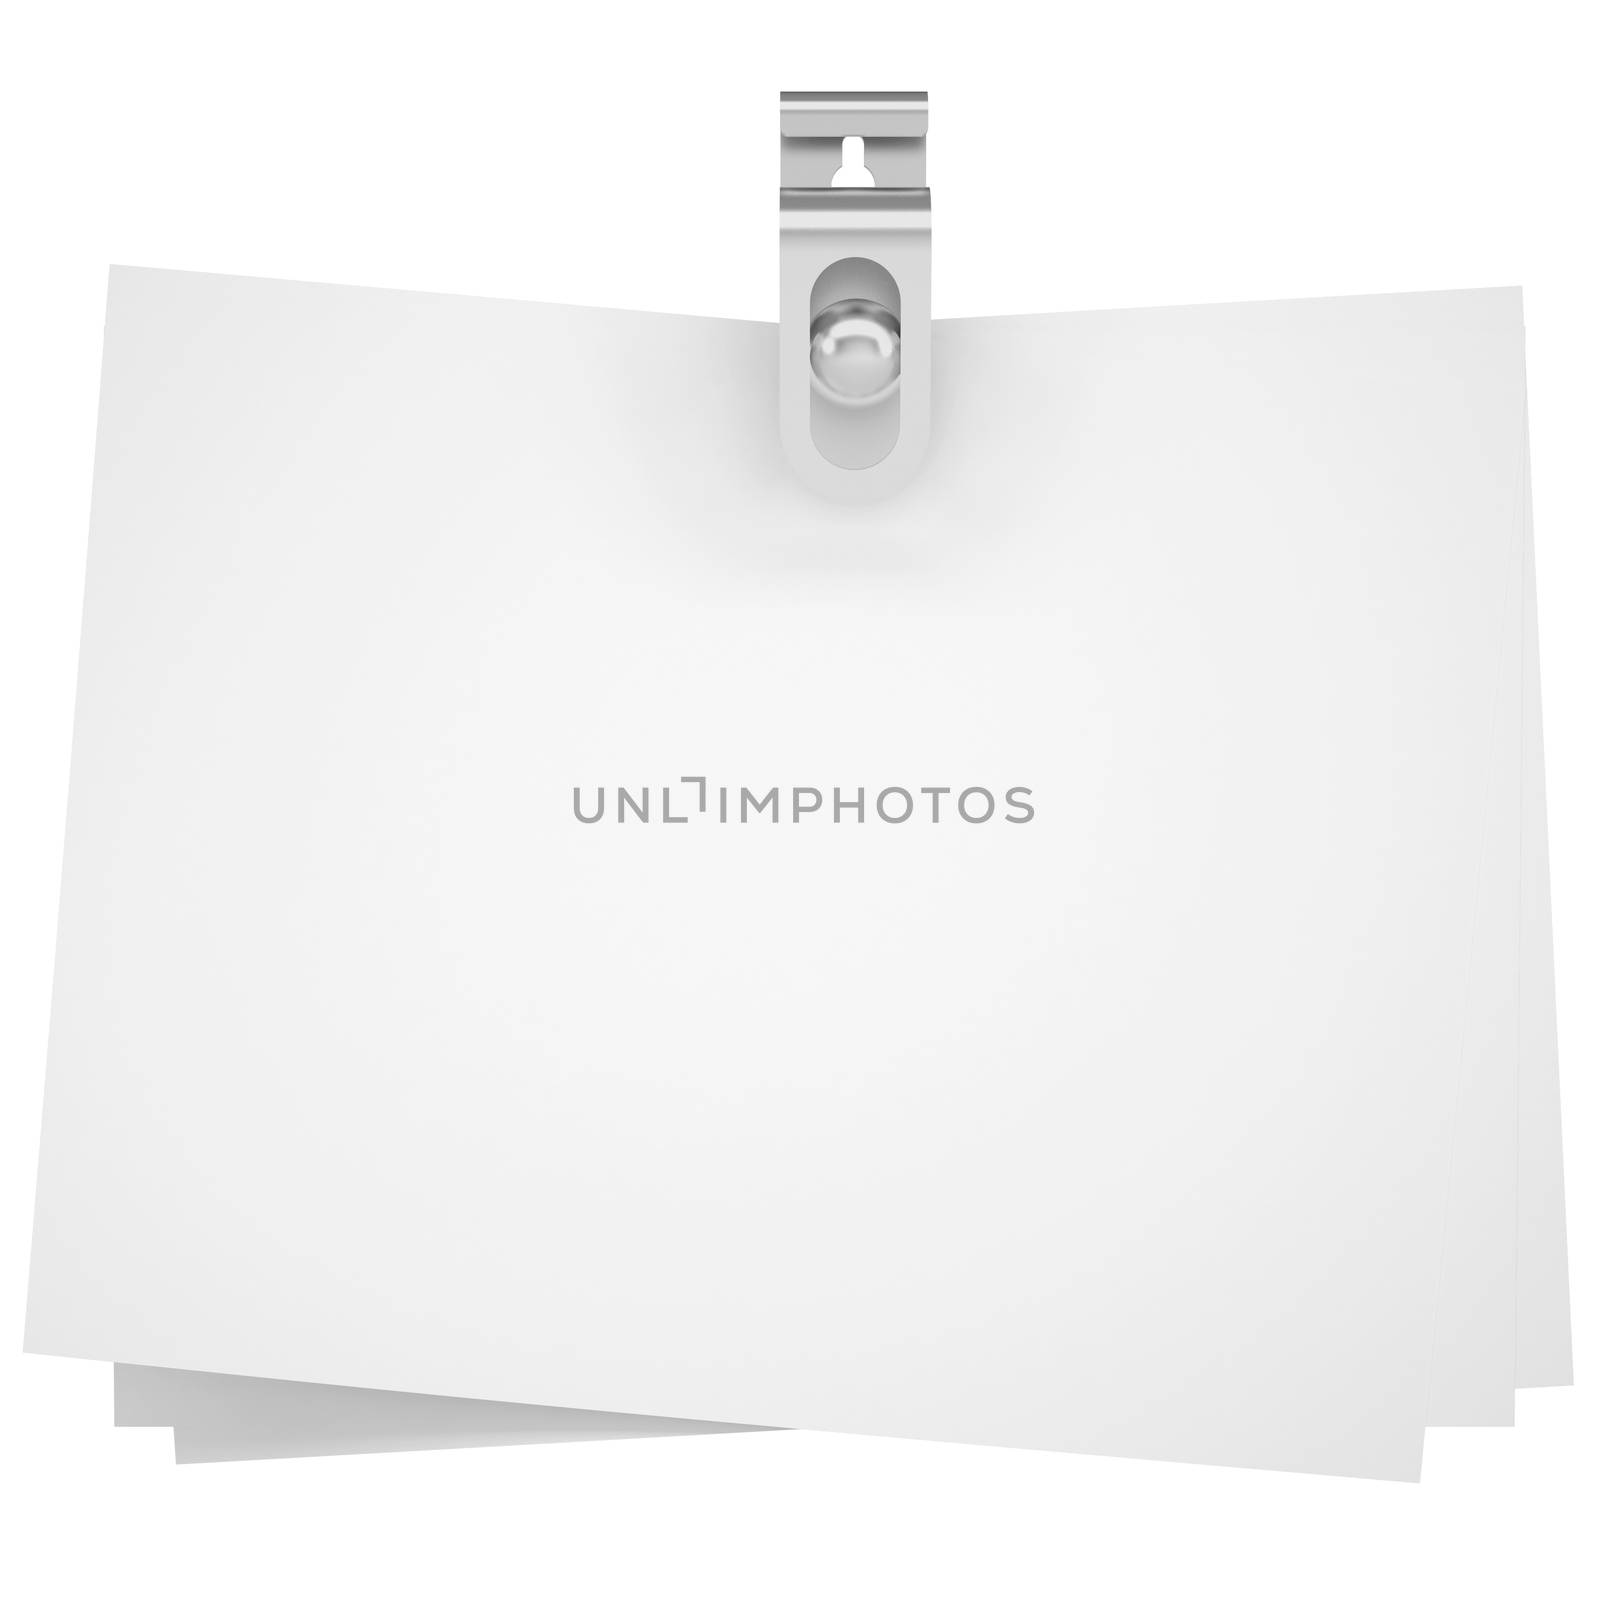 Binder clip and paper. Isolated render on a white background